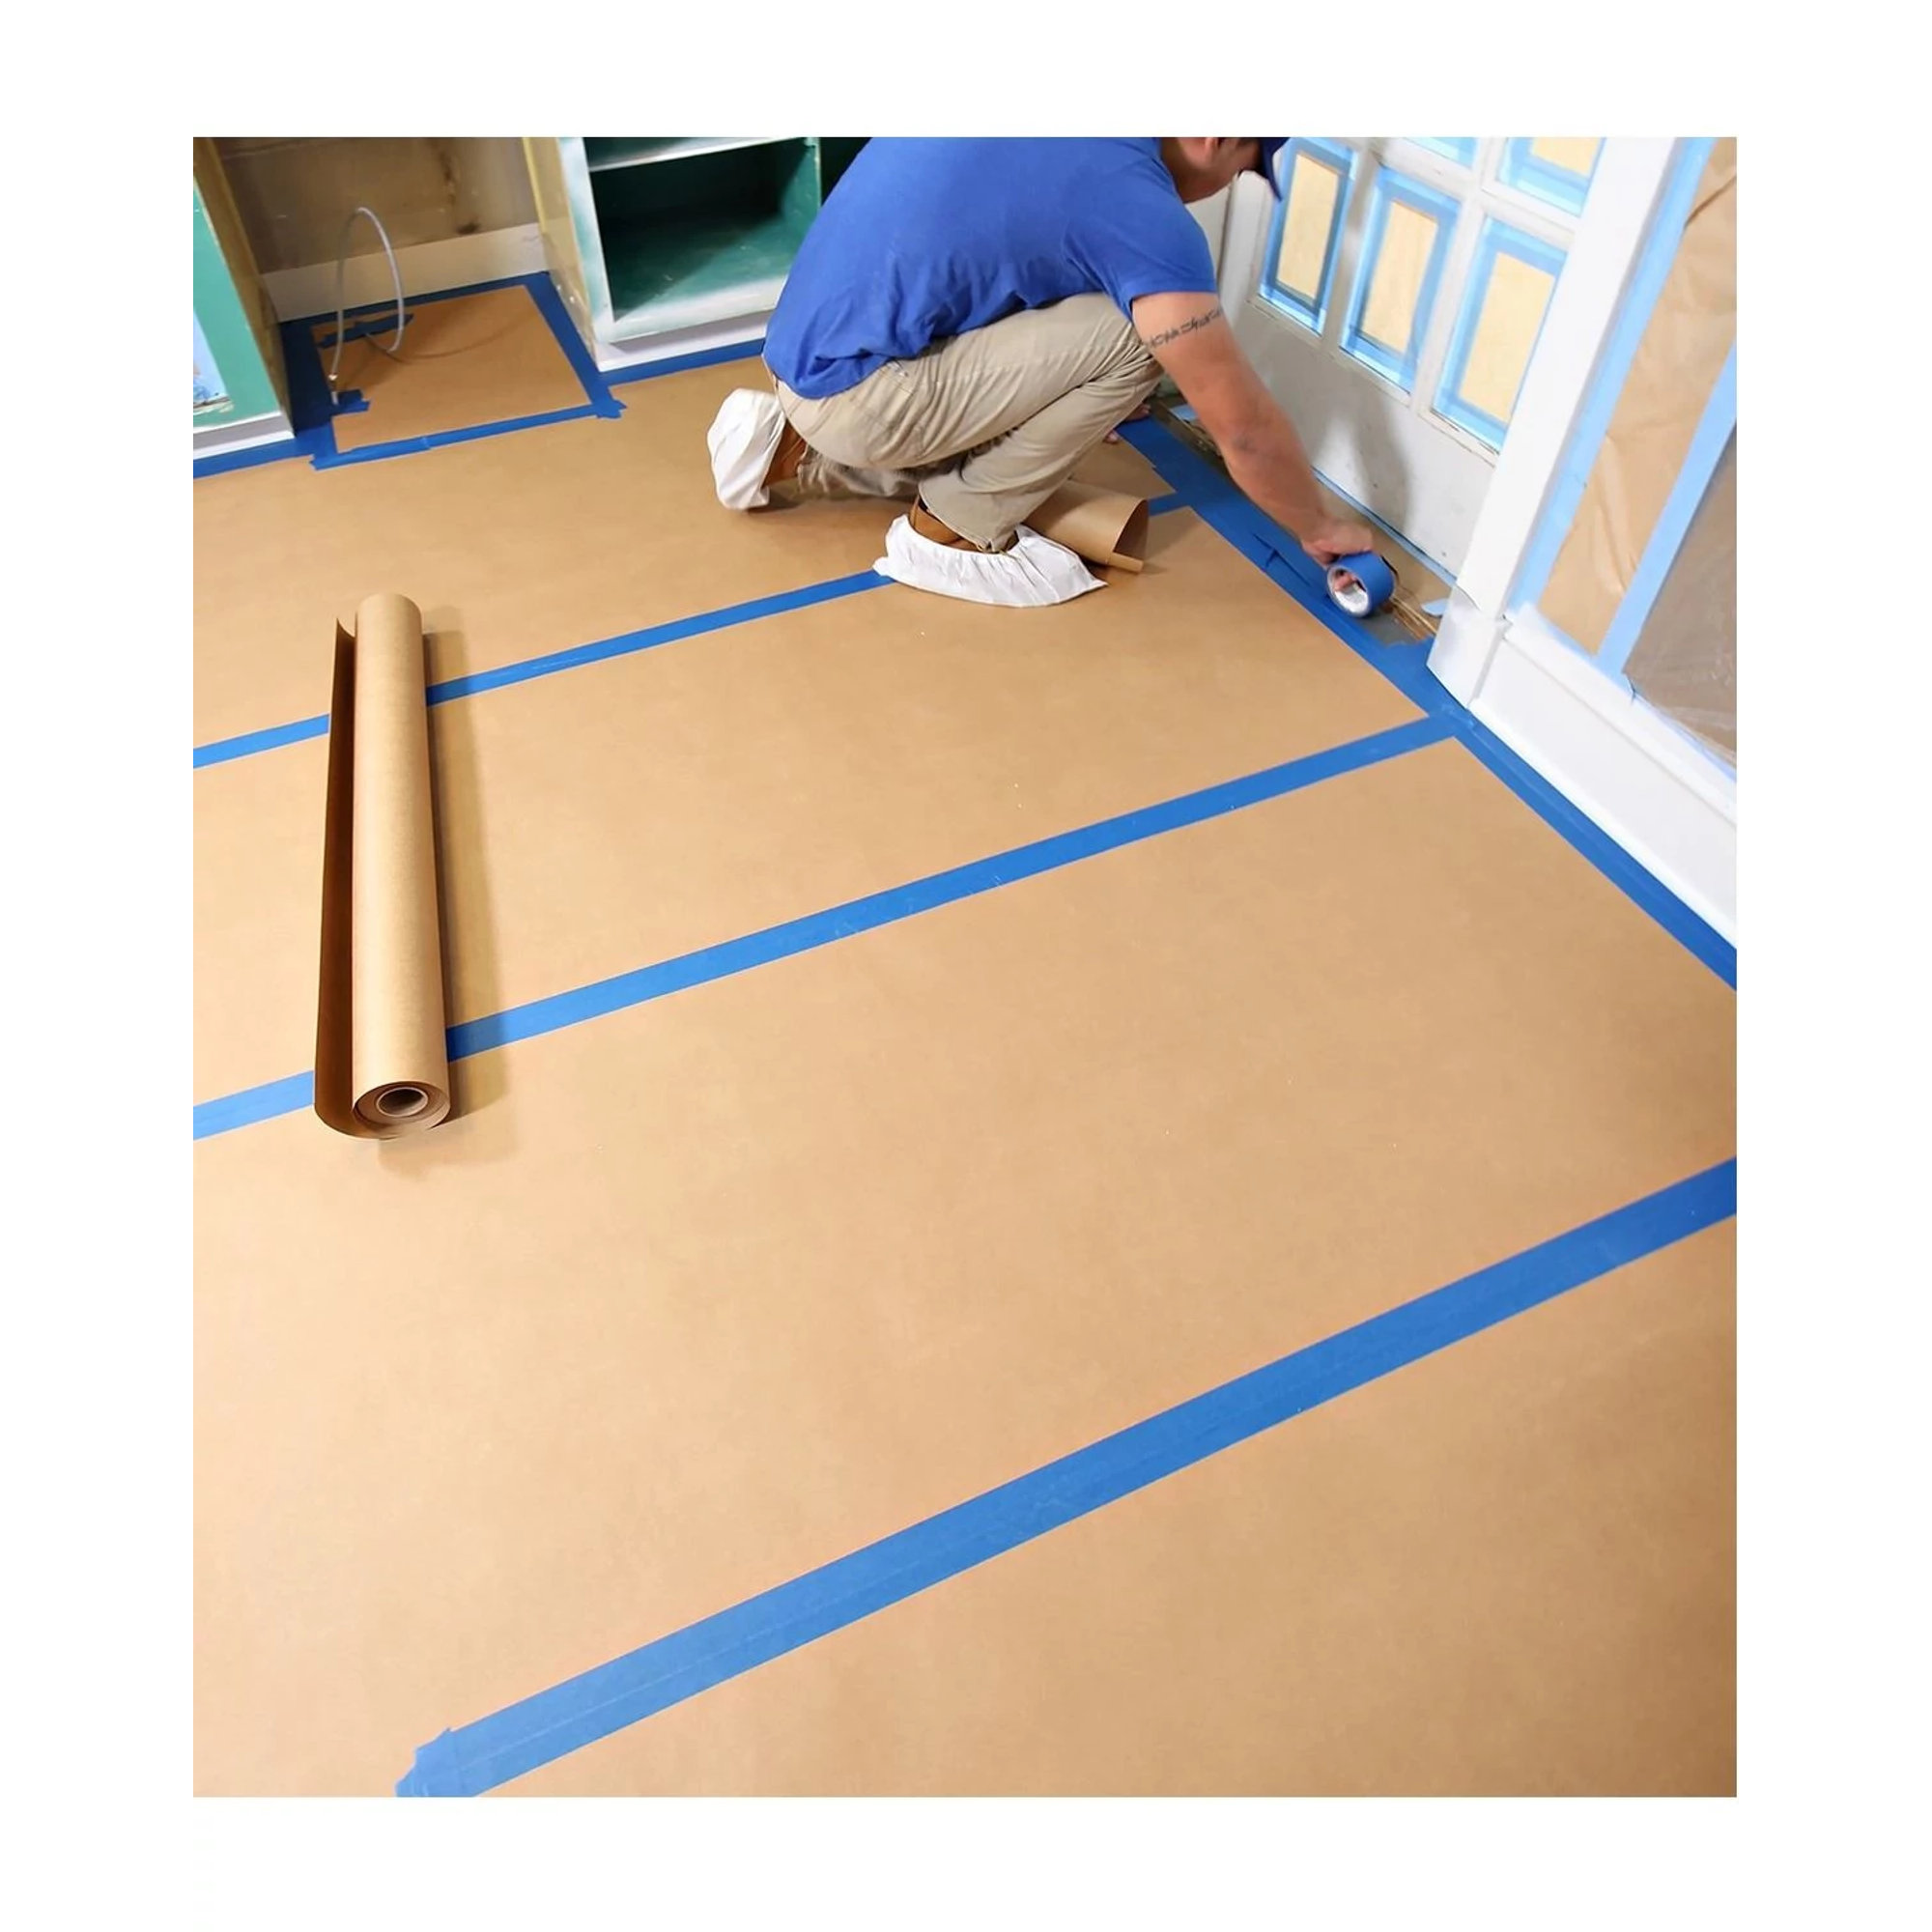 Trimaco X-Paper Flooring Protection